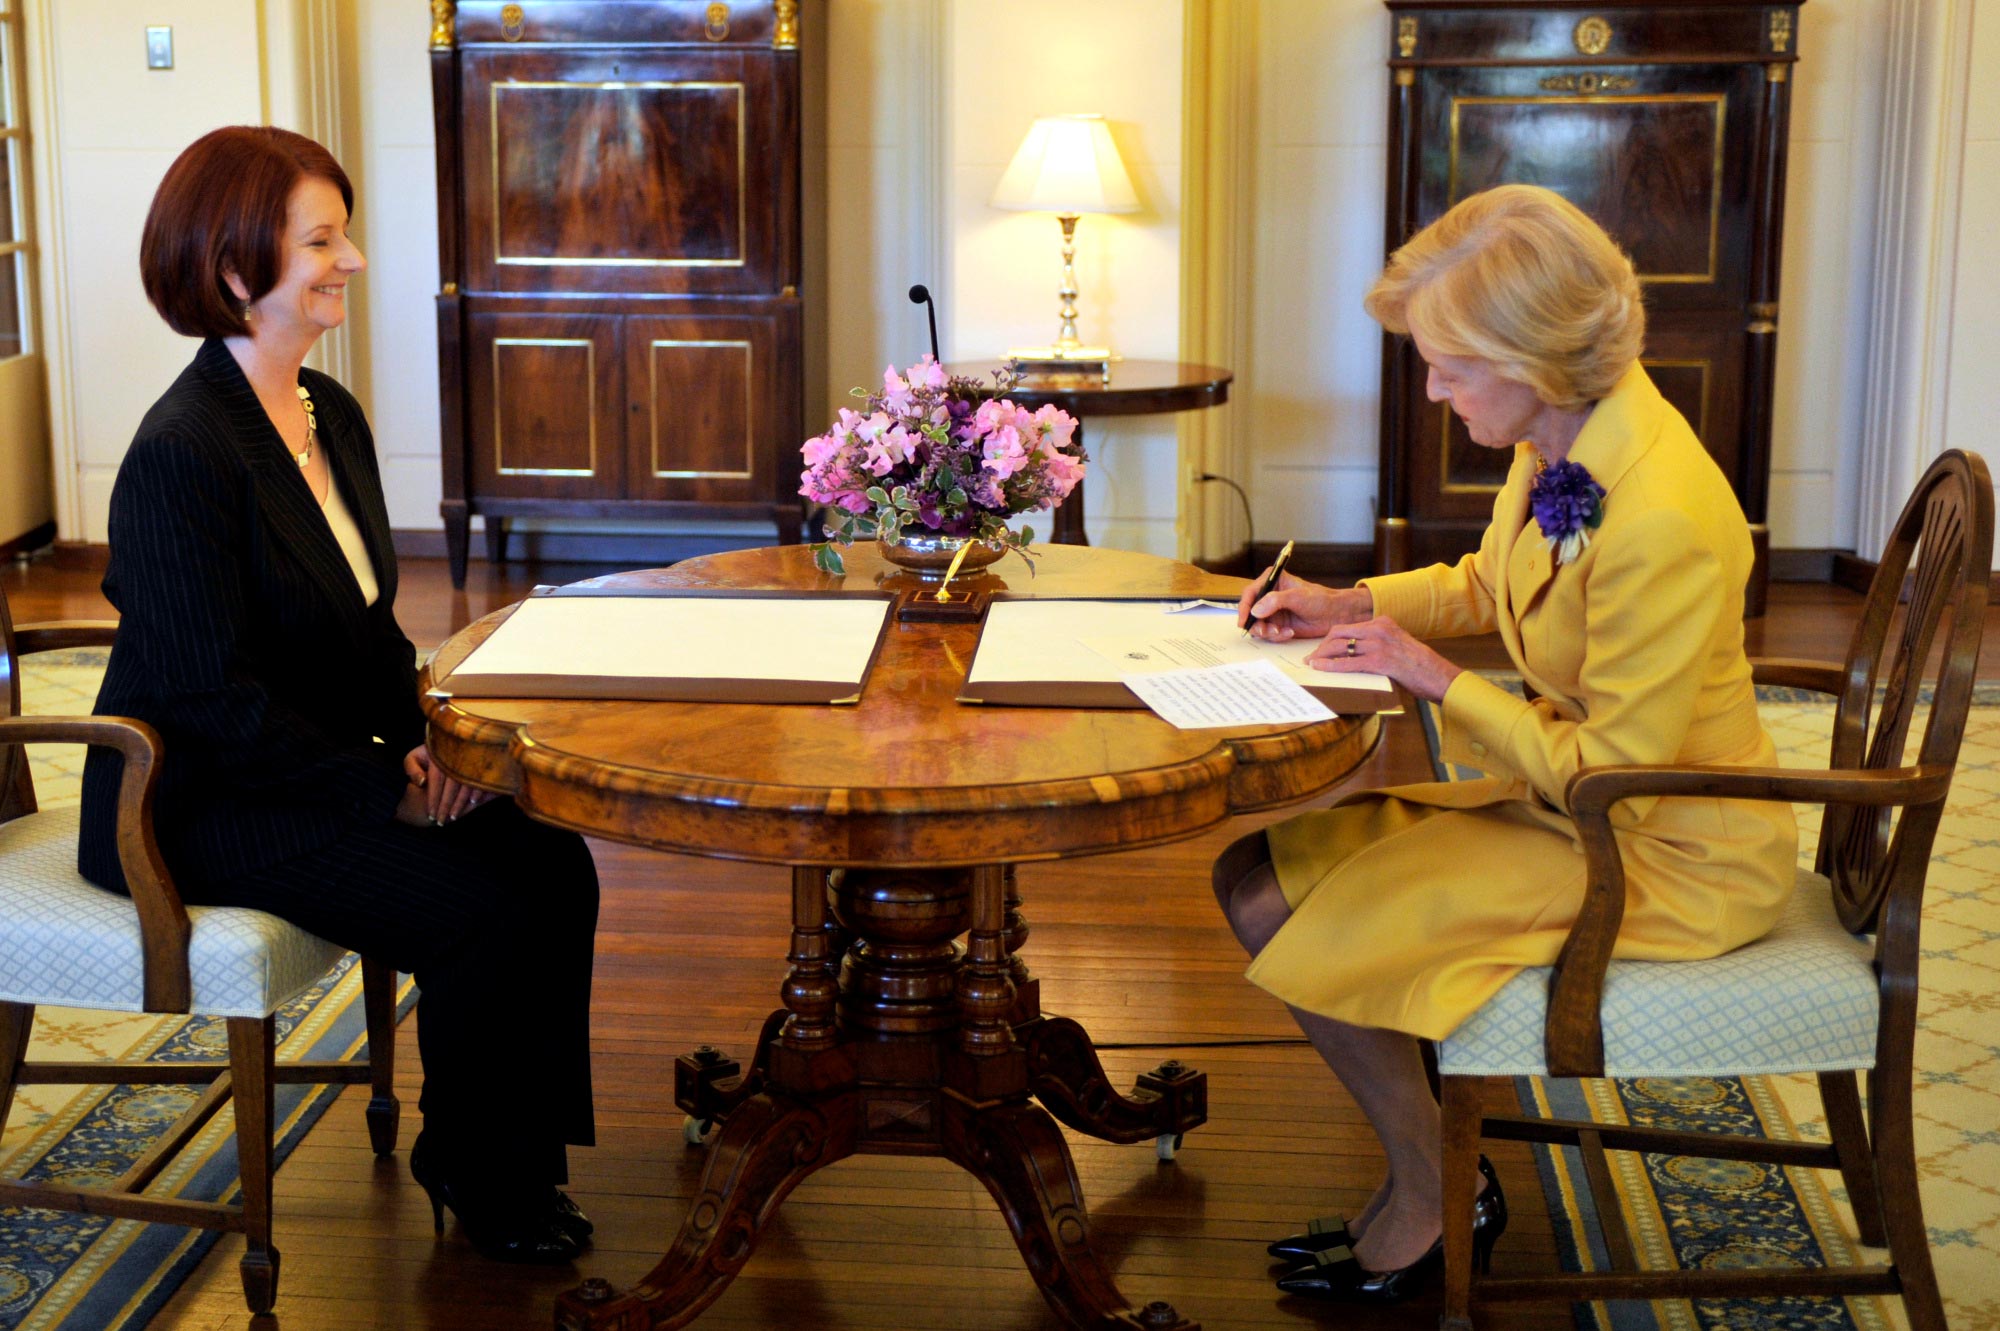 Governor-General Quentin Bryce signs Julia Gillard’s commission as prime minister of Australia at Government House, Canberra, 24 June 2010.